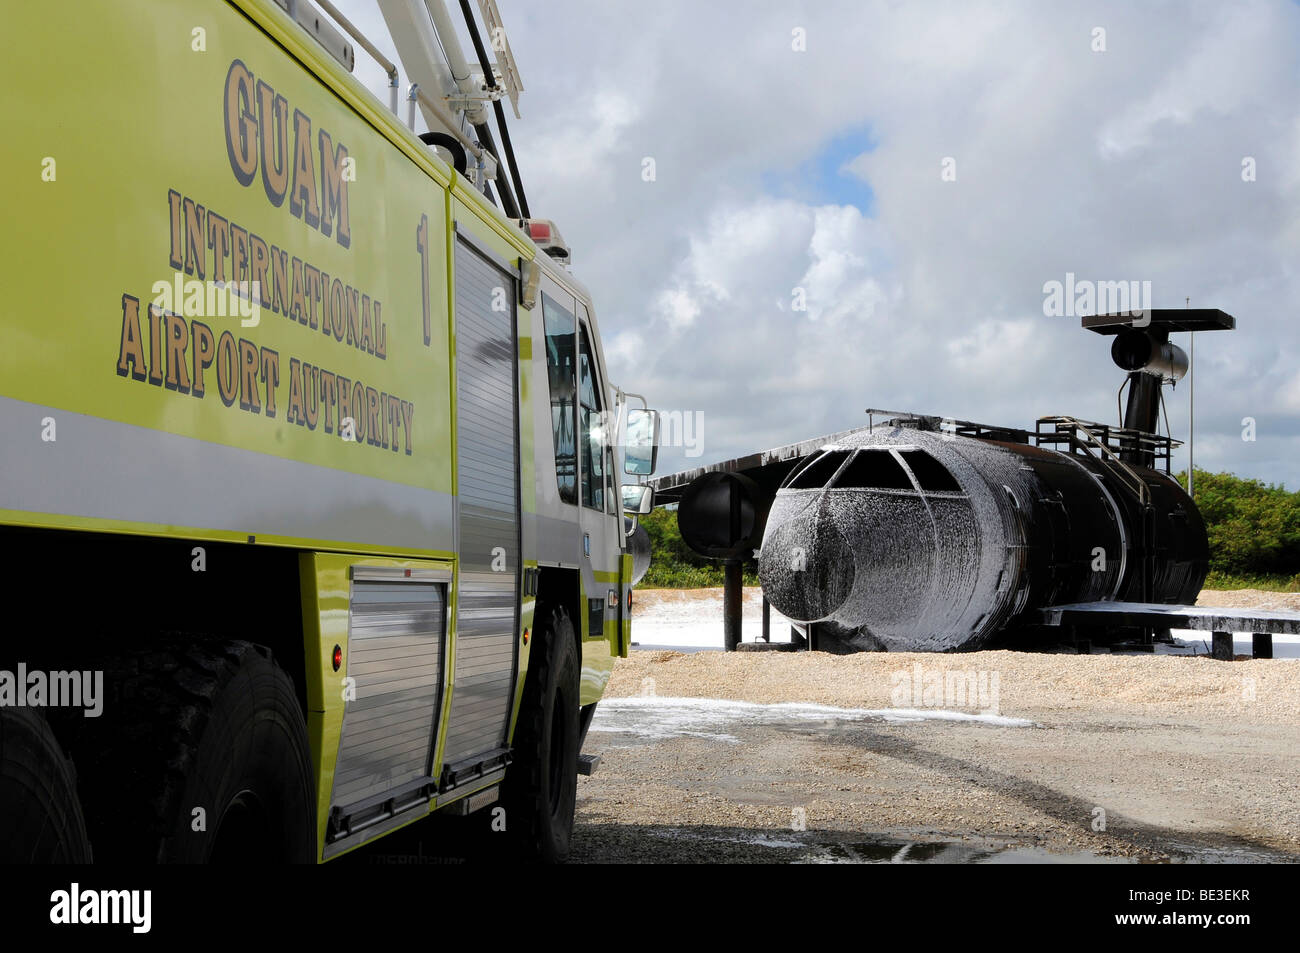 Guam's WONPAT Airport practices putting out a fire on the aircraft fire trainer. Stock Photo